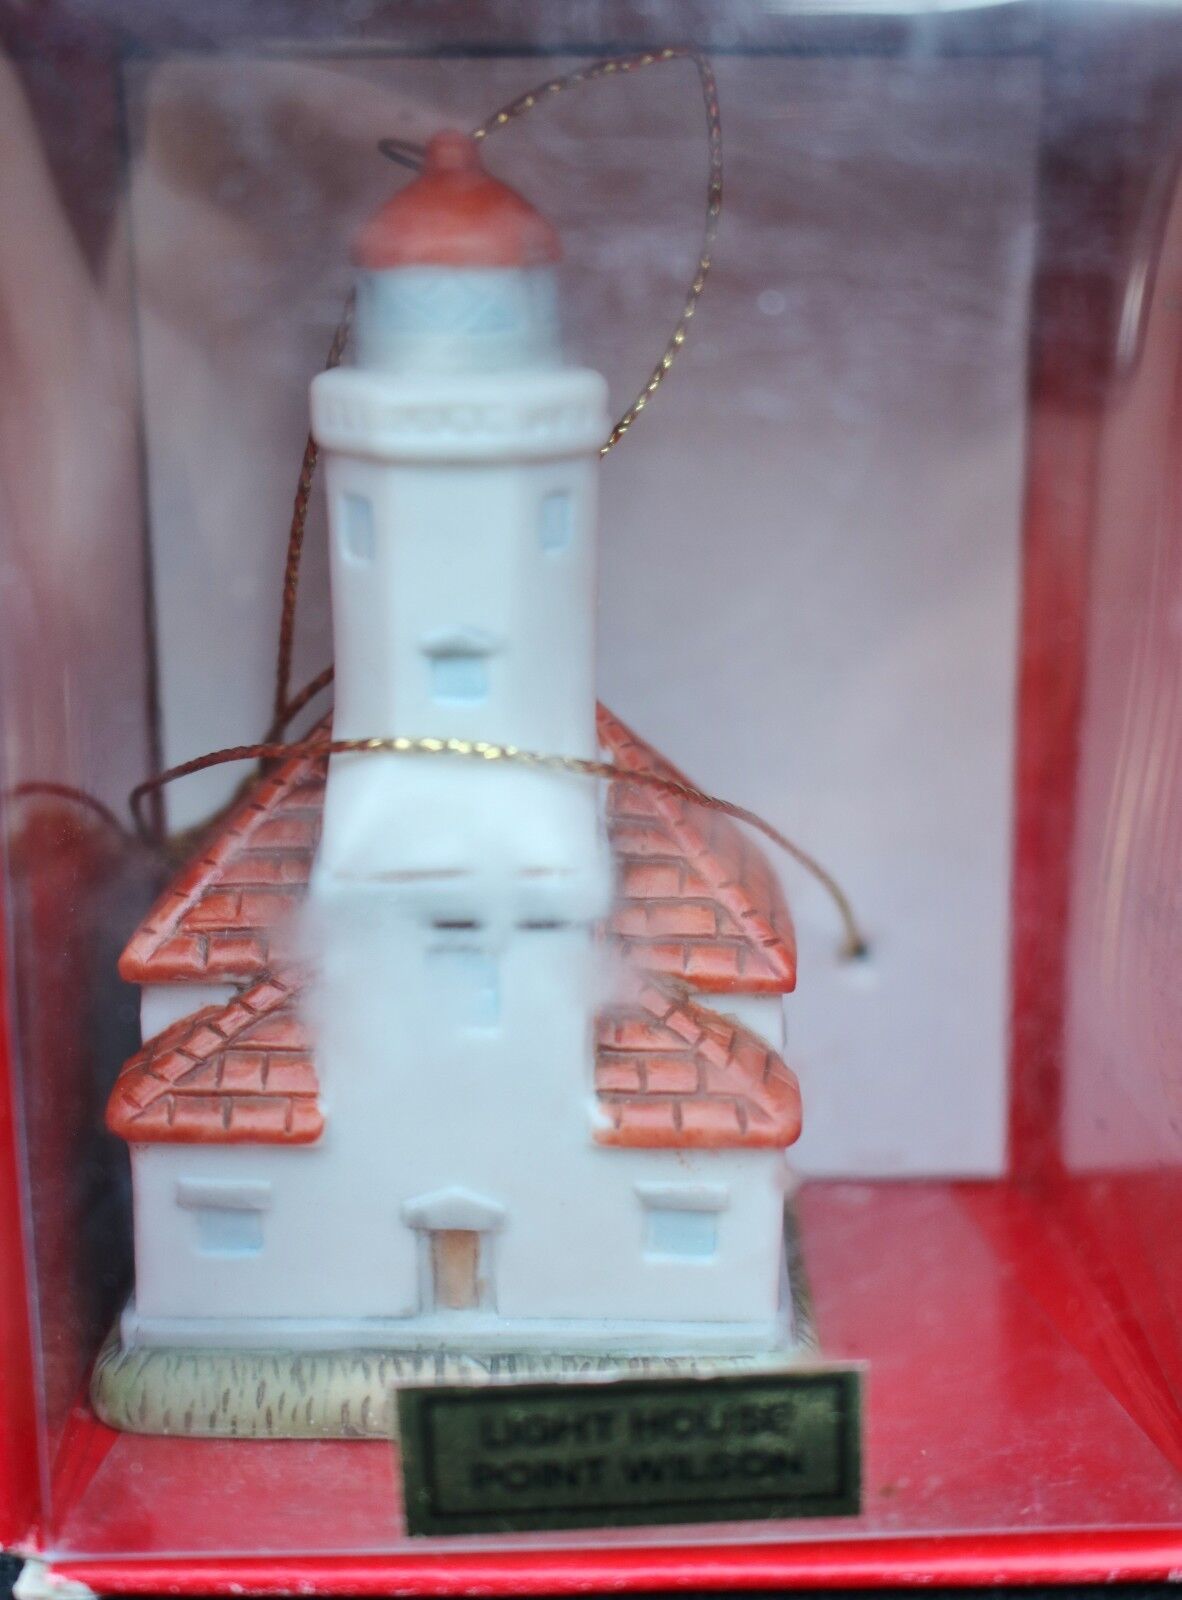 Primary image for Lefton Christmas Ornament Wilson Point Lighthouse 1995 10722 b143